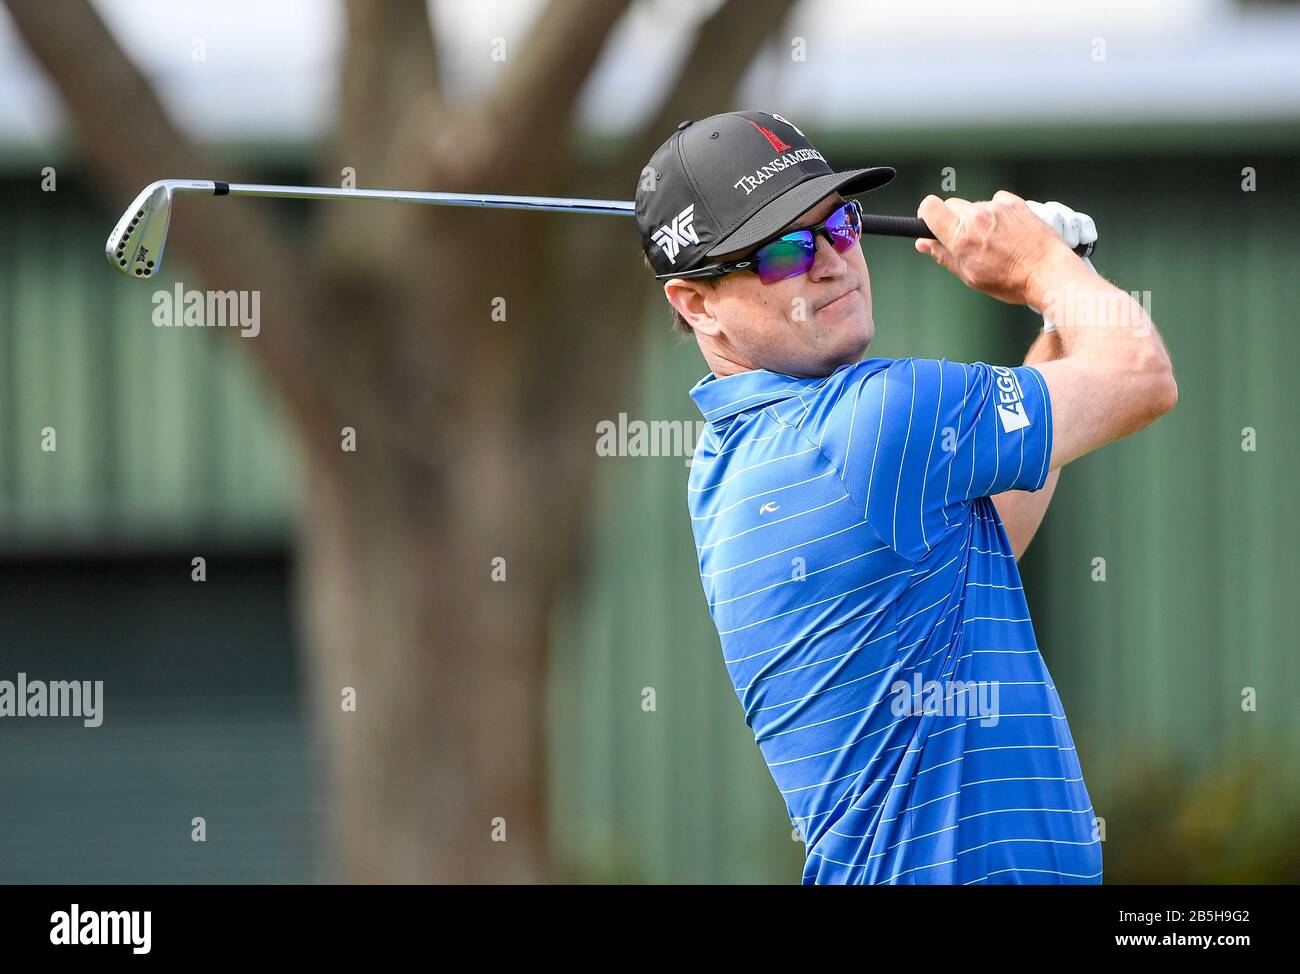 Orlando, FL, USA. 8th Mar, 2020. Zach Johnson on the second tee during the final round of the Arnold Palmer Invitational presented by Mastercard held at Arnold Palmer's Bay Hill Club & Lodge in Orlando, Fl. Romeo T Guzman/CSM/Alamy Live News Stock Photo